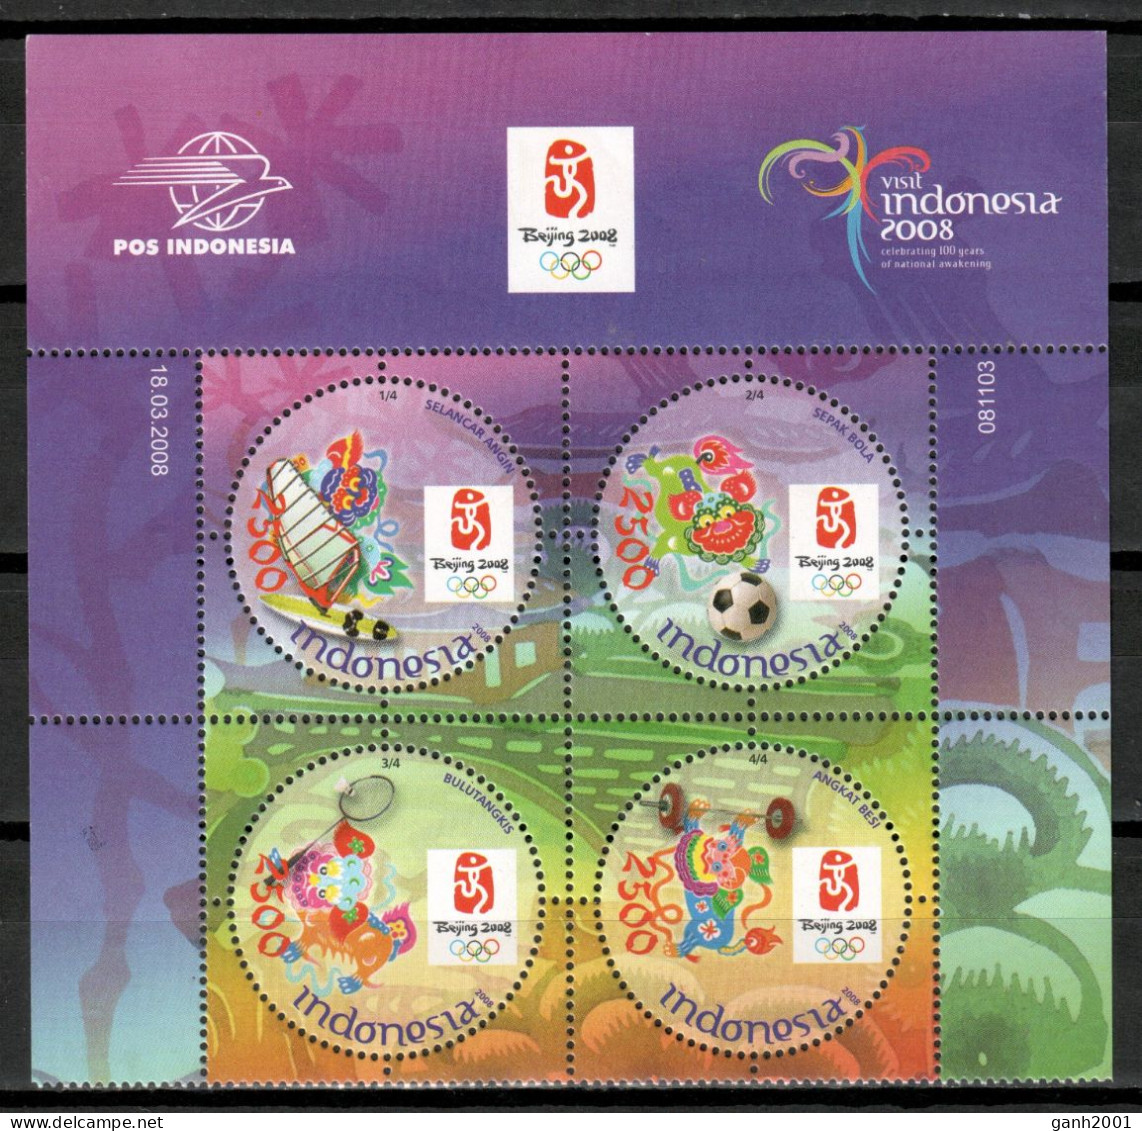 Indonesia 2008 / Olympic Games Beijing MNH Juegos Olímpicos Pekín Olympische Spiele / Cu20405  8-16 - Sommer 2008: Peking